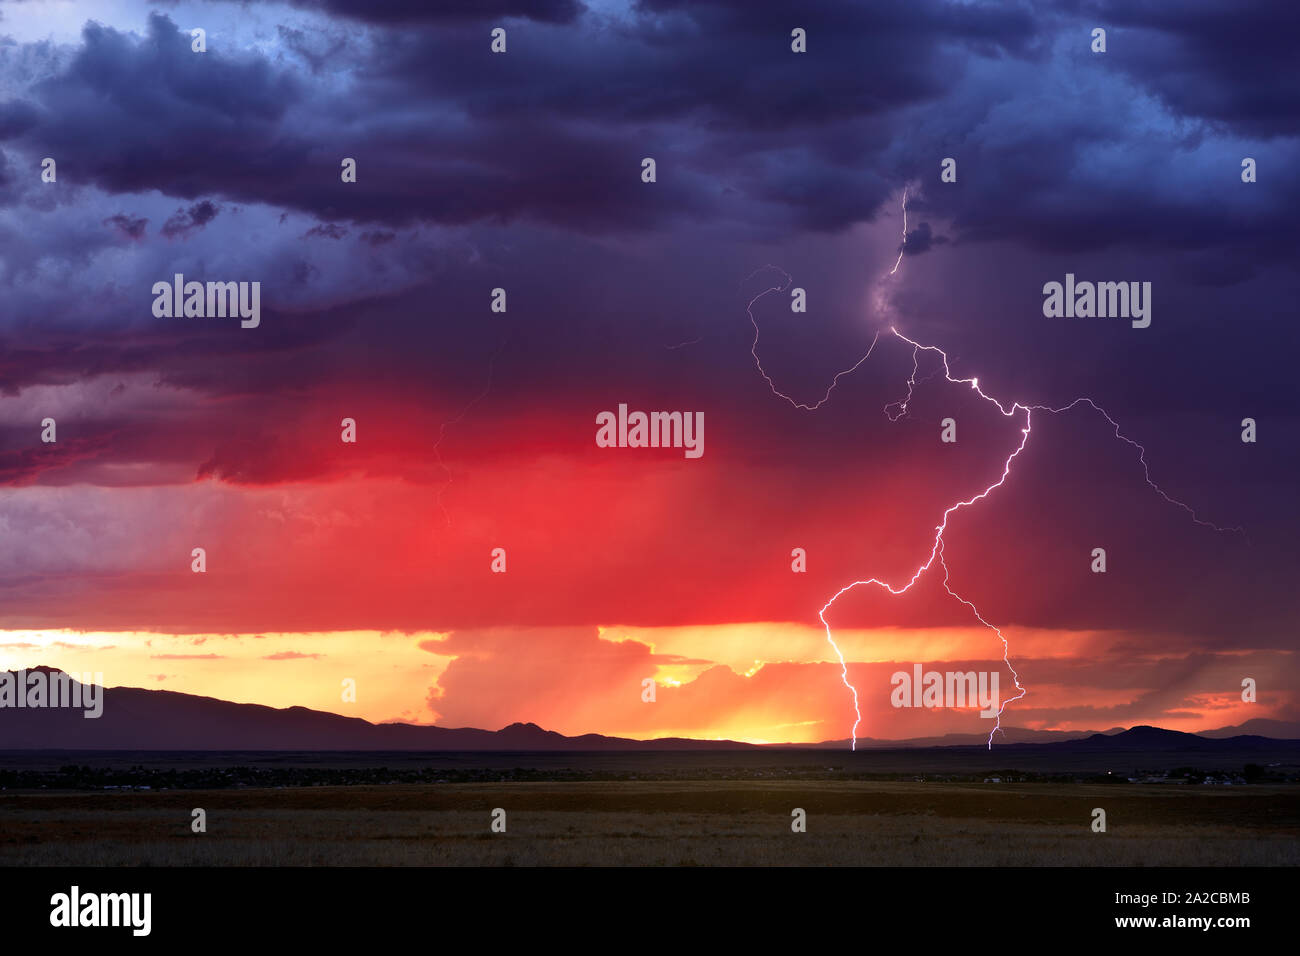 Monsoon lightning strike in a colorful sunset sky as a thunderstorm clouds move off the Bradshaw Mountains near Prescott, Arizona Stock Photo